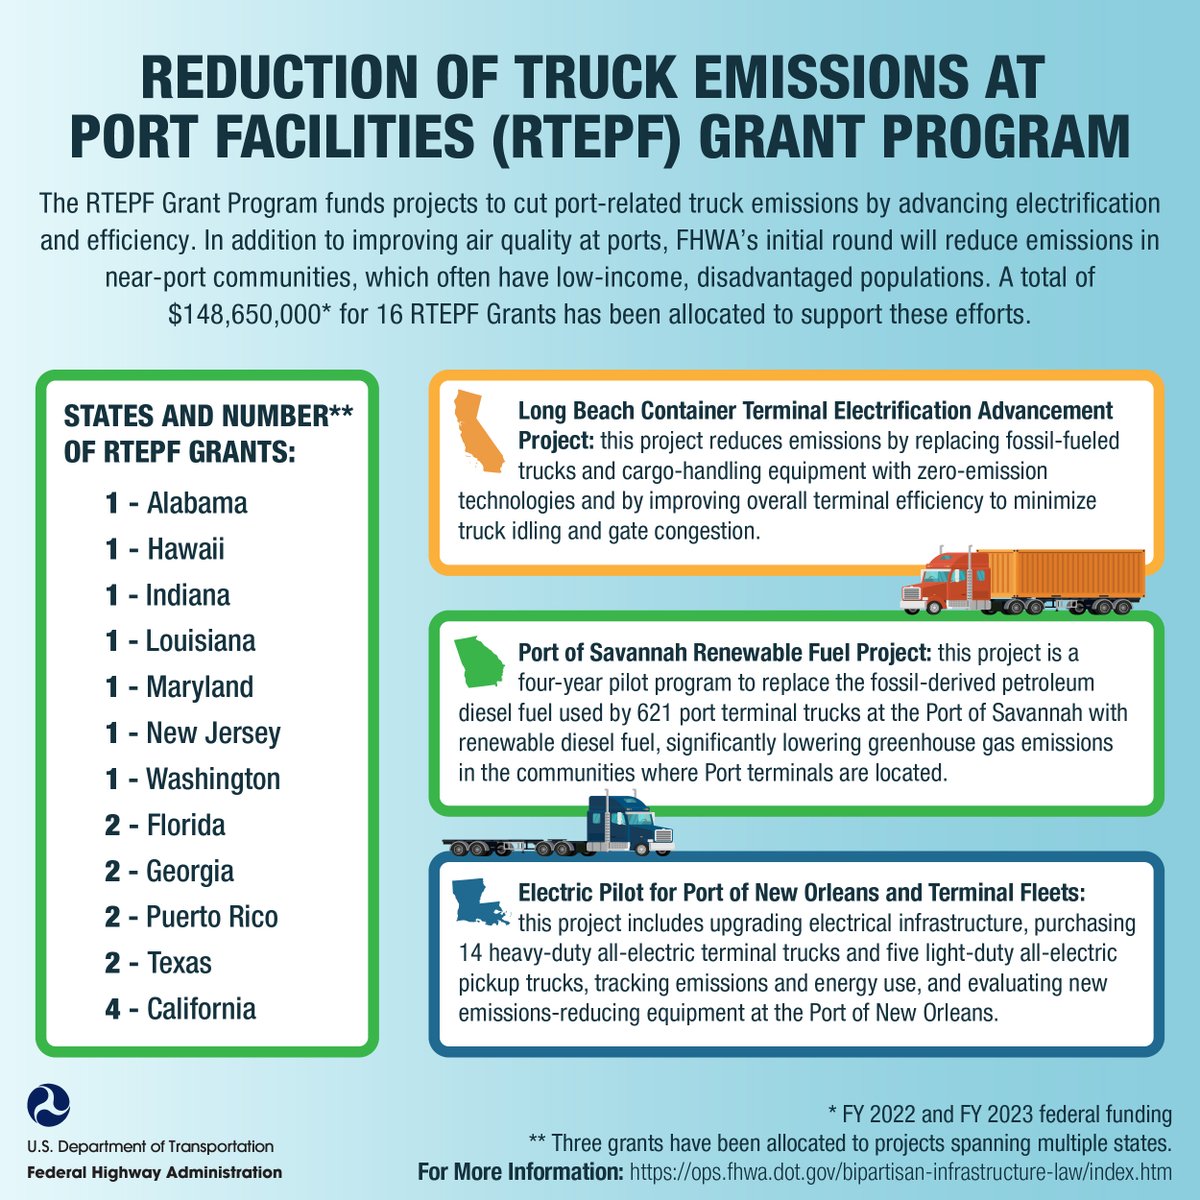 The Reduction of Truck Emissions at Port Facilities Grant Program funds projects to advance electrification & efficiency, improving air-quality at ports. Nearly $149M has been allocated to support these efforts. ops.fhwa.dot.gov/bipartisan-inf… #BipartisanInfrastructureLaw